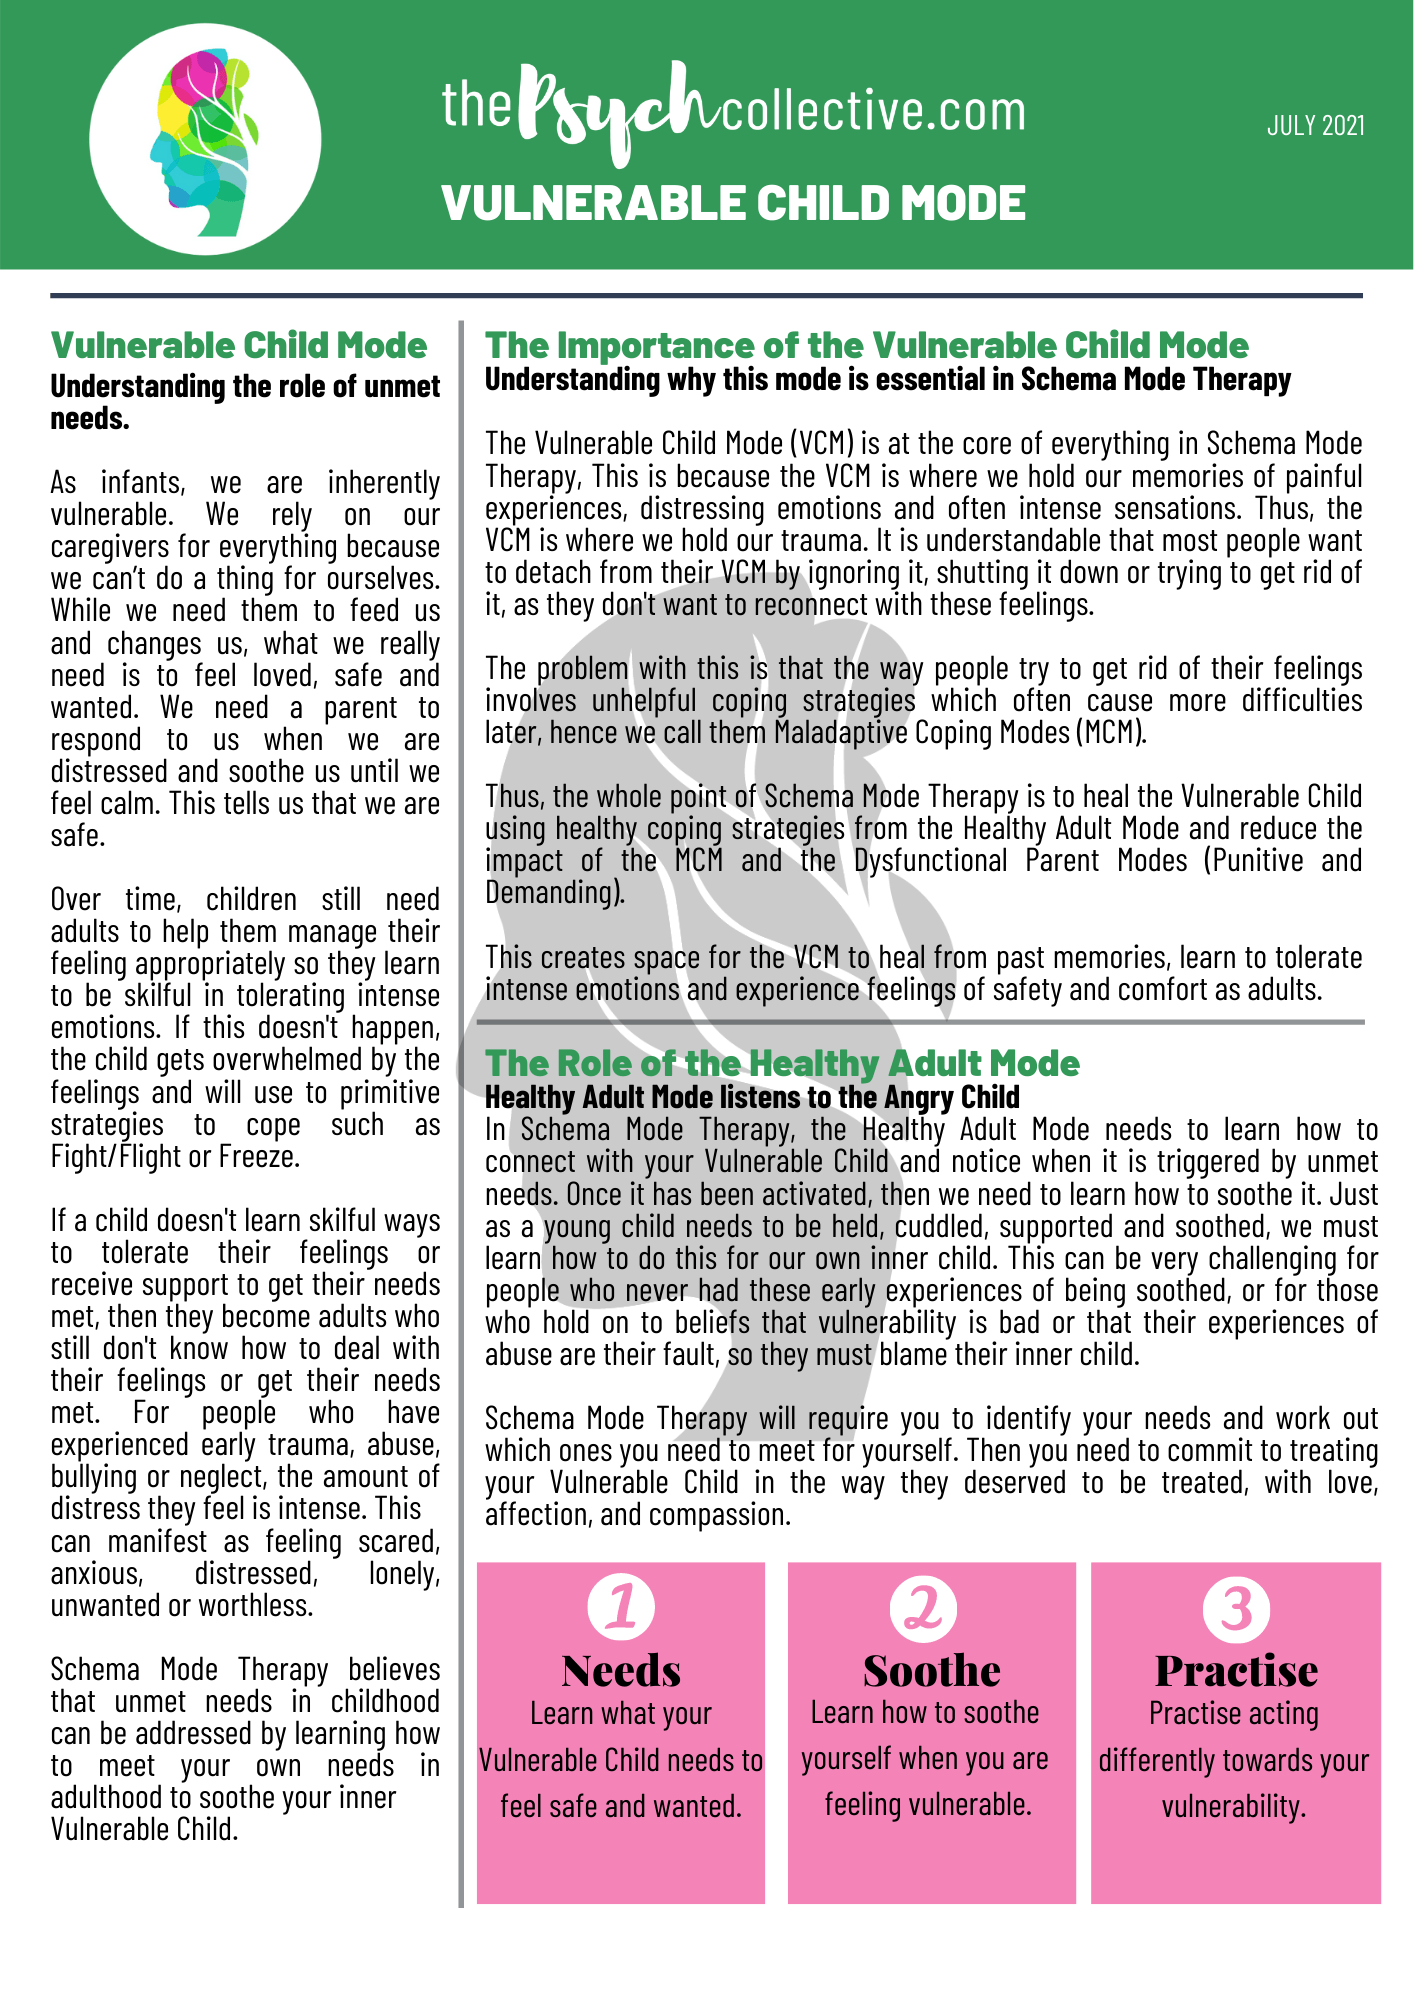 Vulnerable Child Mode handout from The Psych Collective